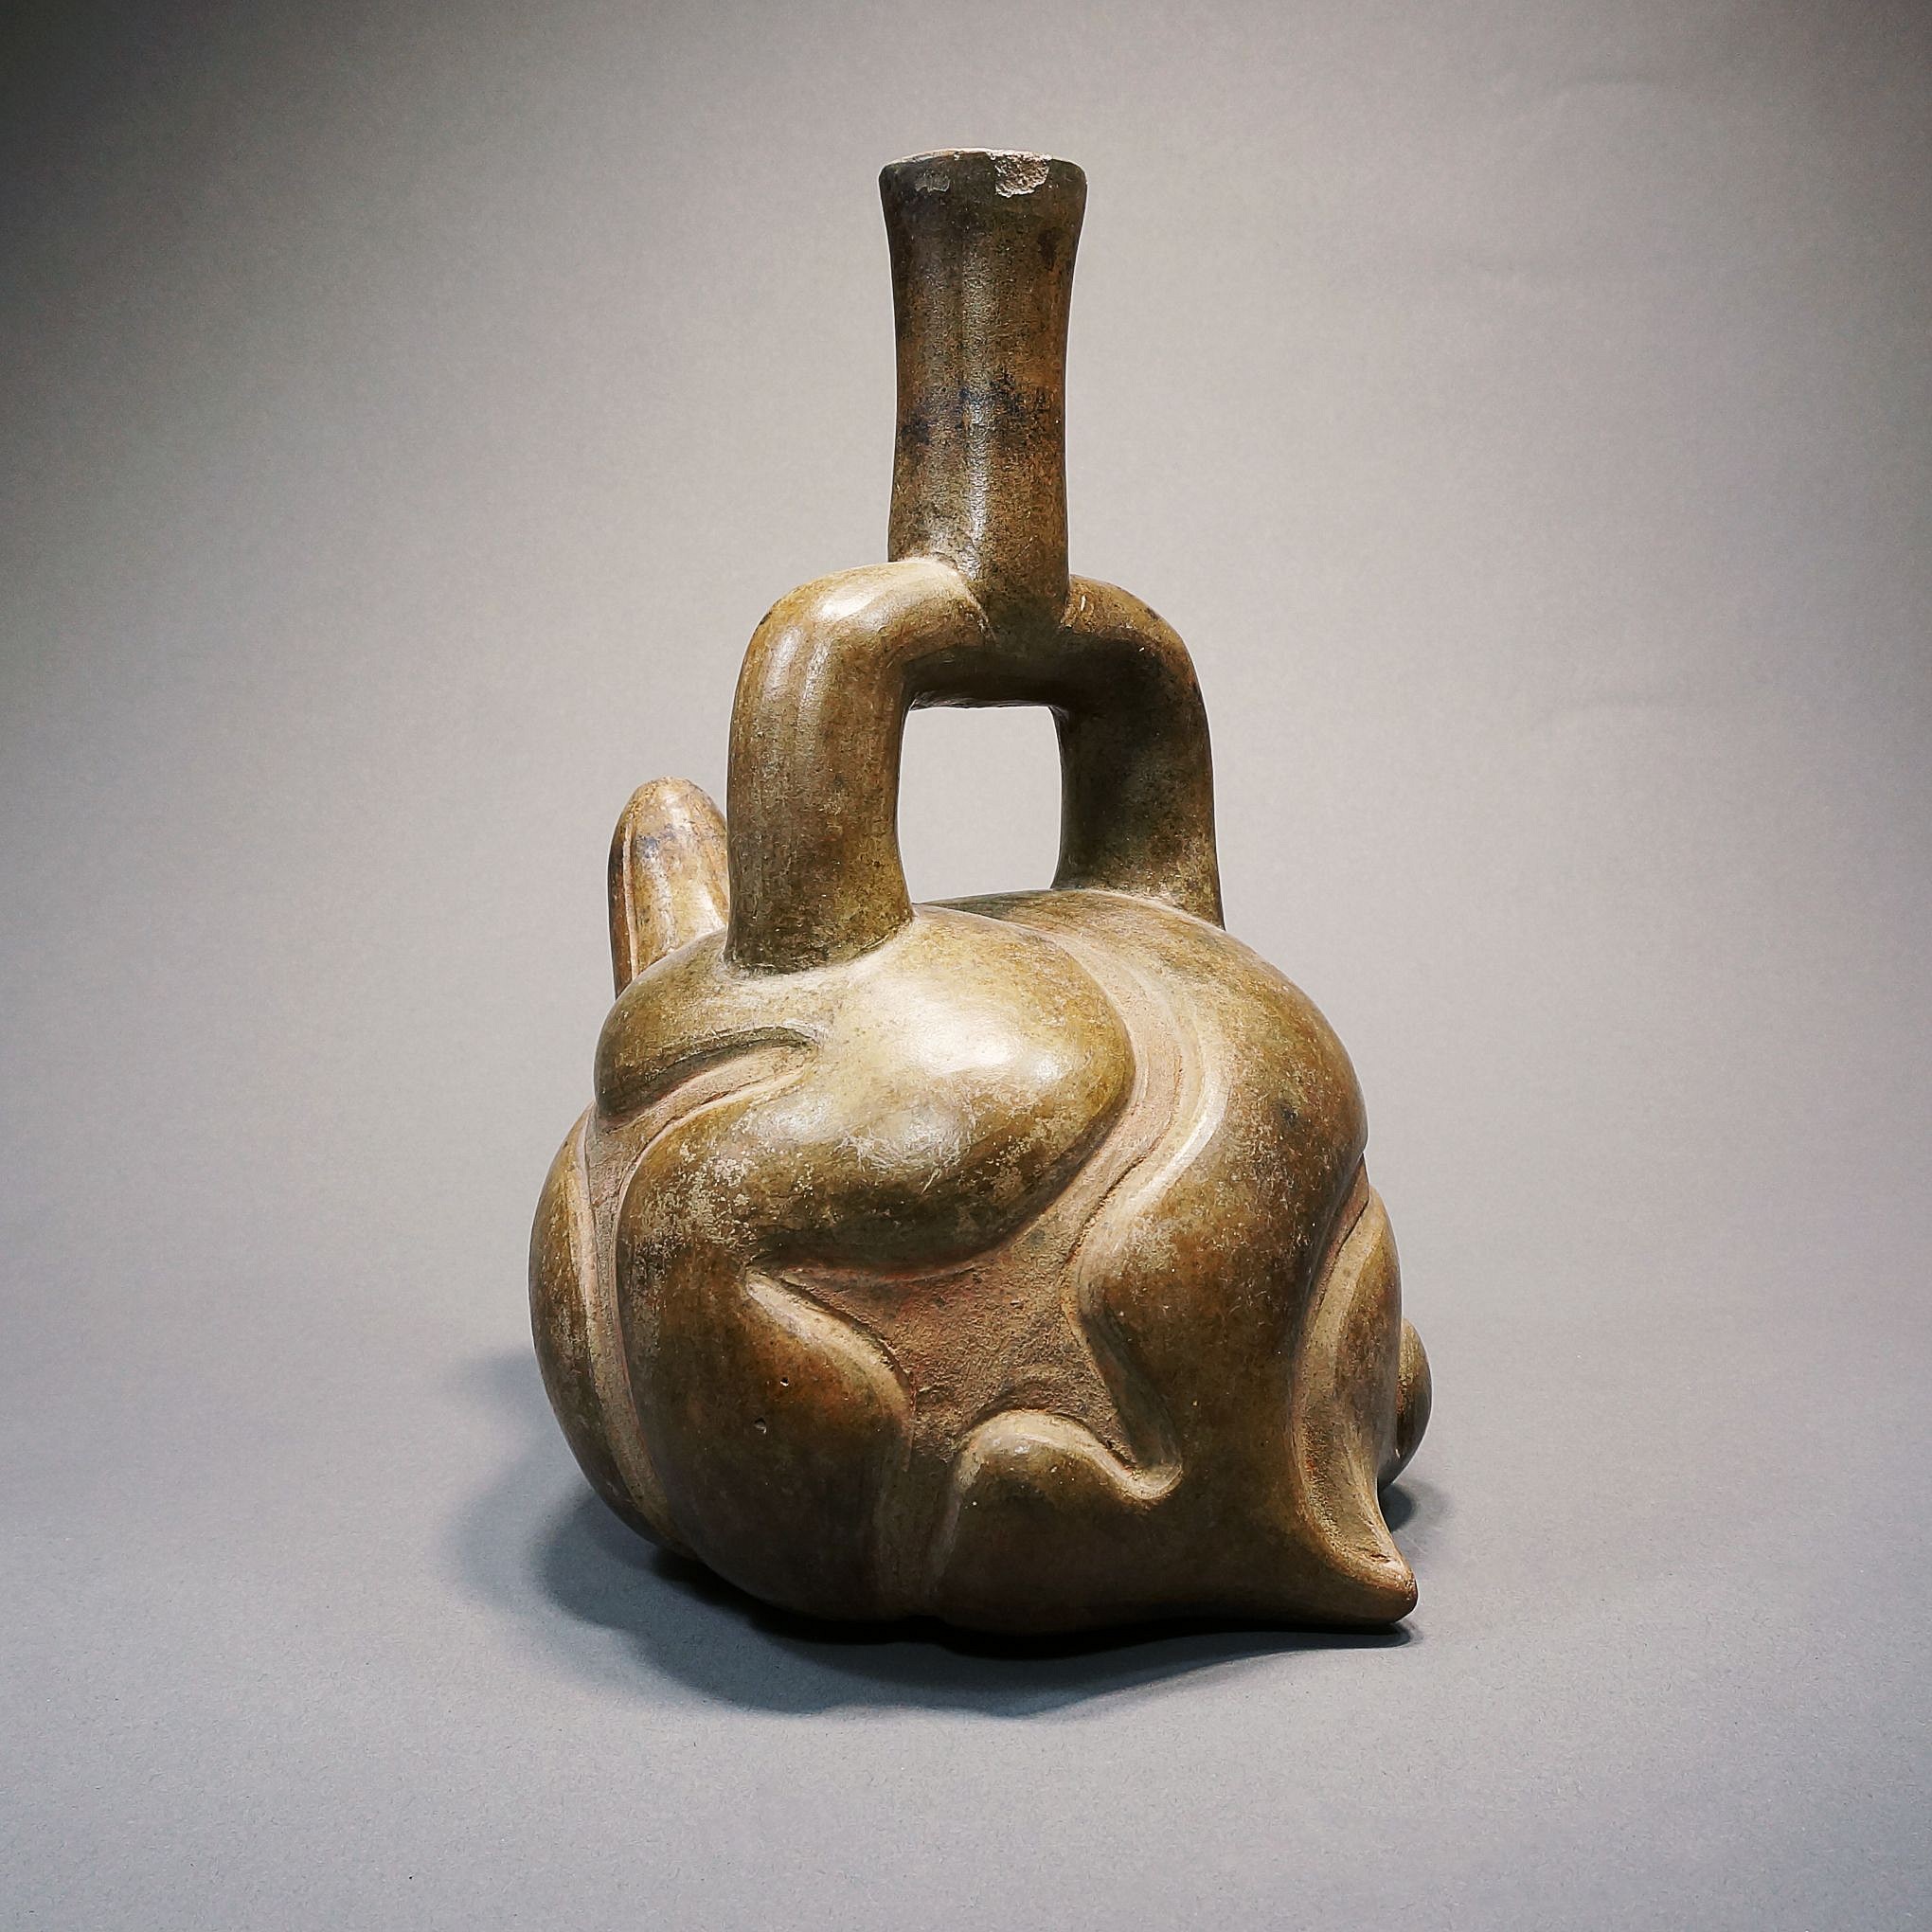 Peru, Chavin Tembladera Style Stirrup Spout Brownware Vessel in the form of an Abstract Animal
Media: Ceramic
Dimensions: Height 9 1/4"
$8,500
n2056